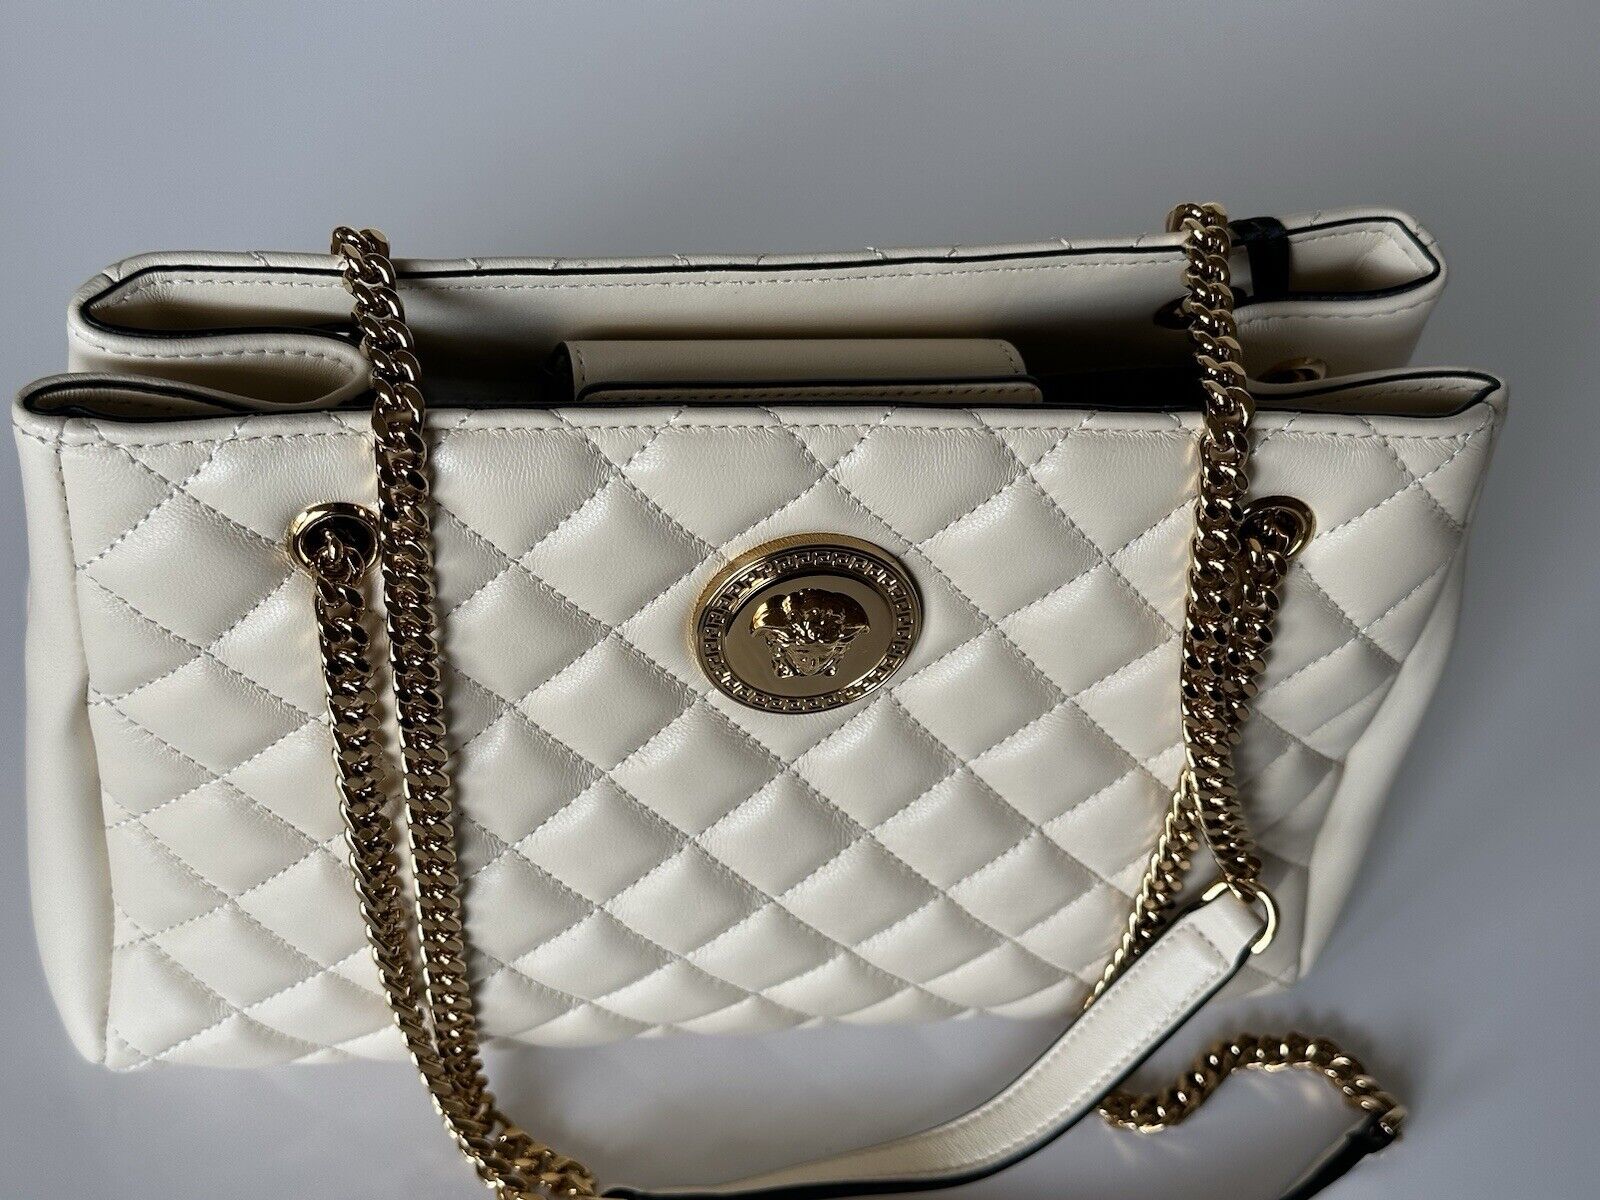 Versace Evening Quilted Lamb Leather Off-White Shoulder Bag 1005560 NWT $1775